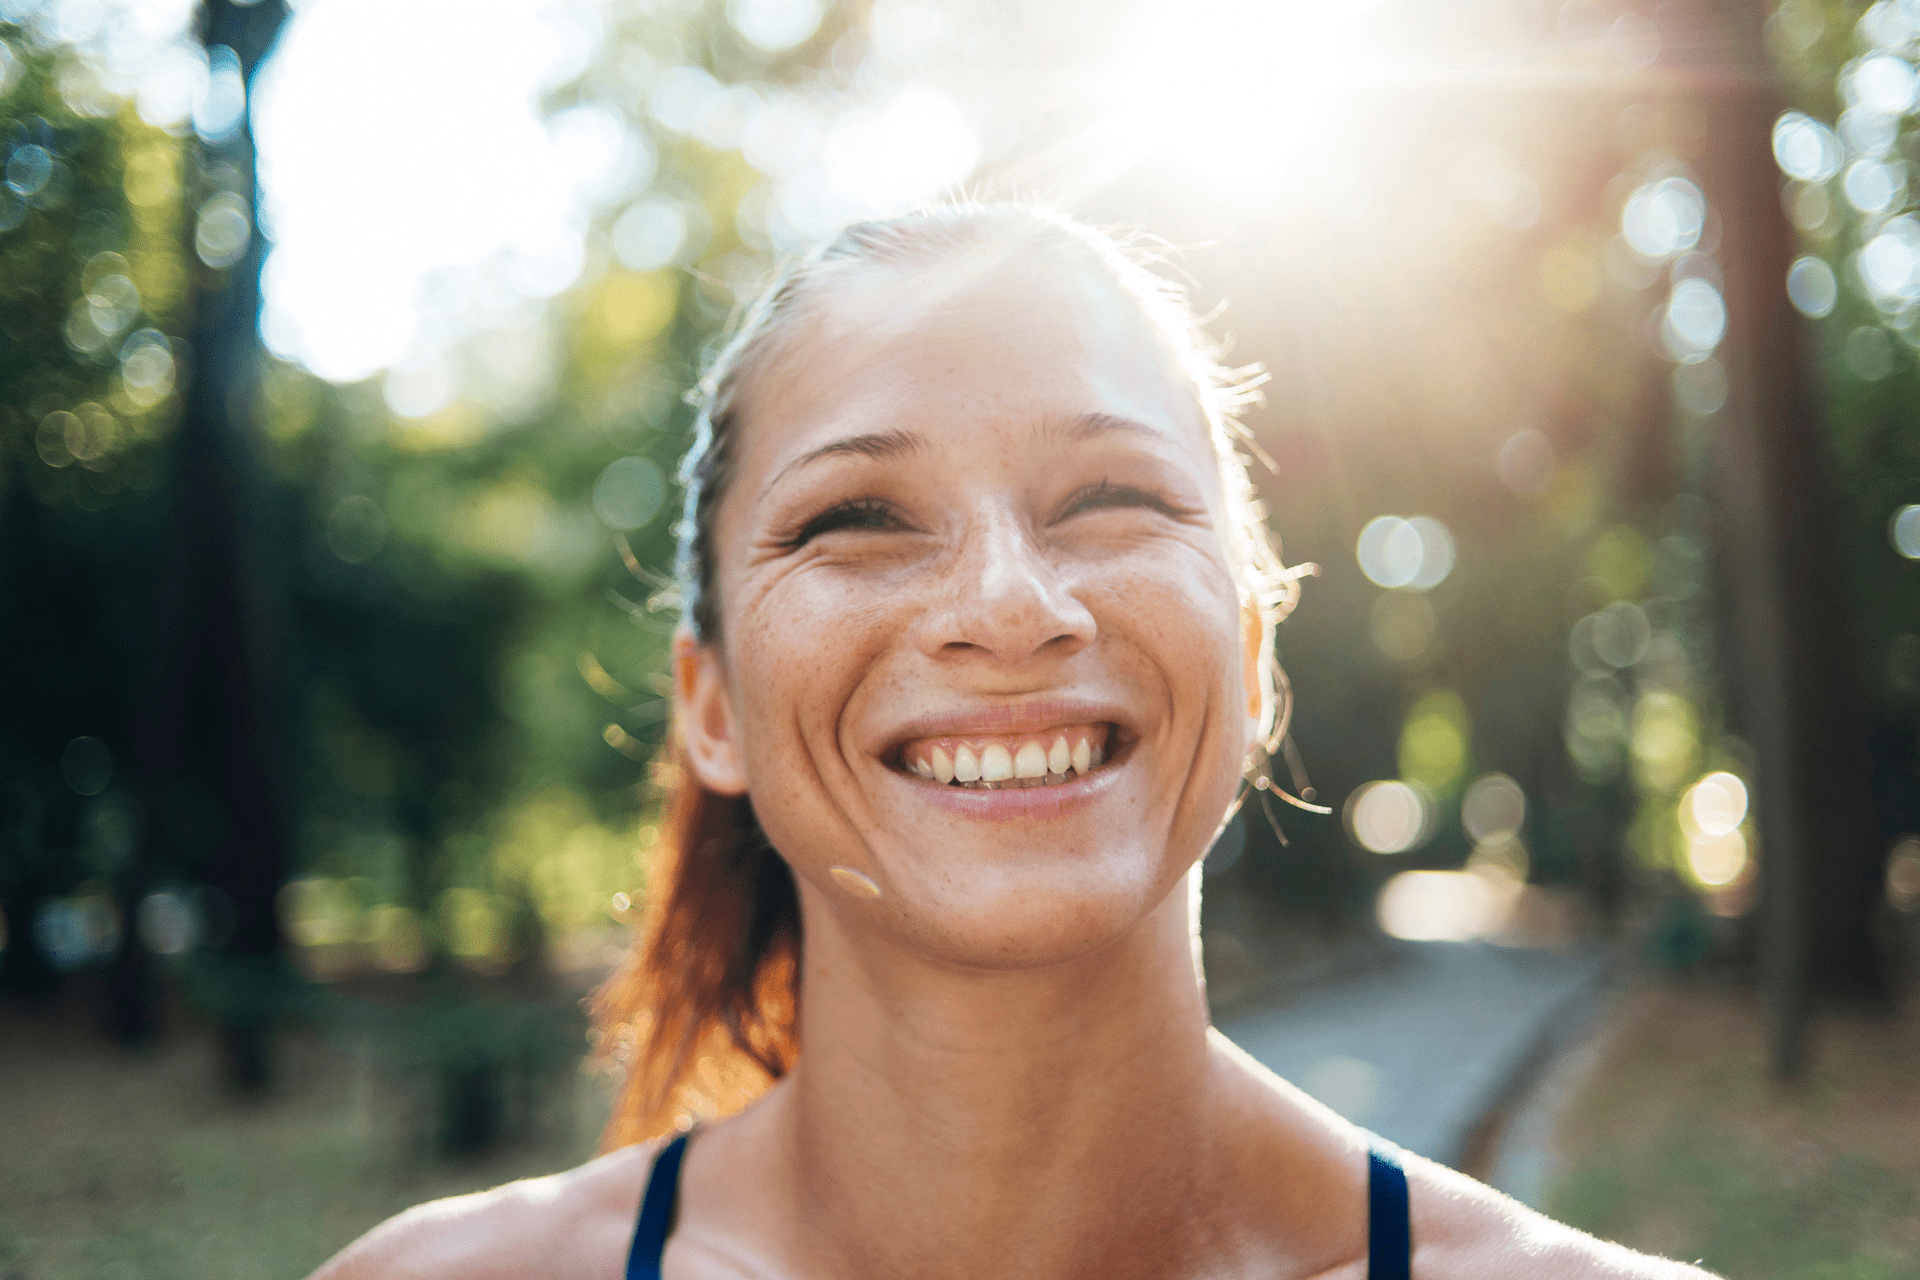 woman outside smiling with an overbite